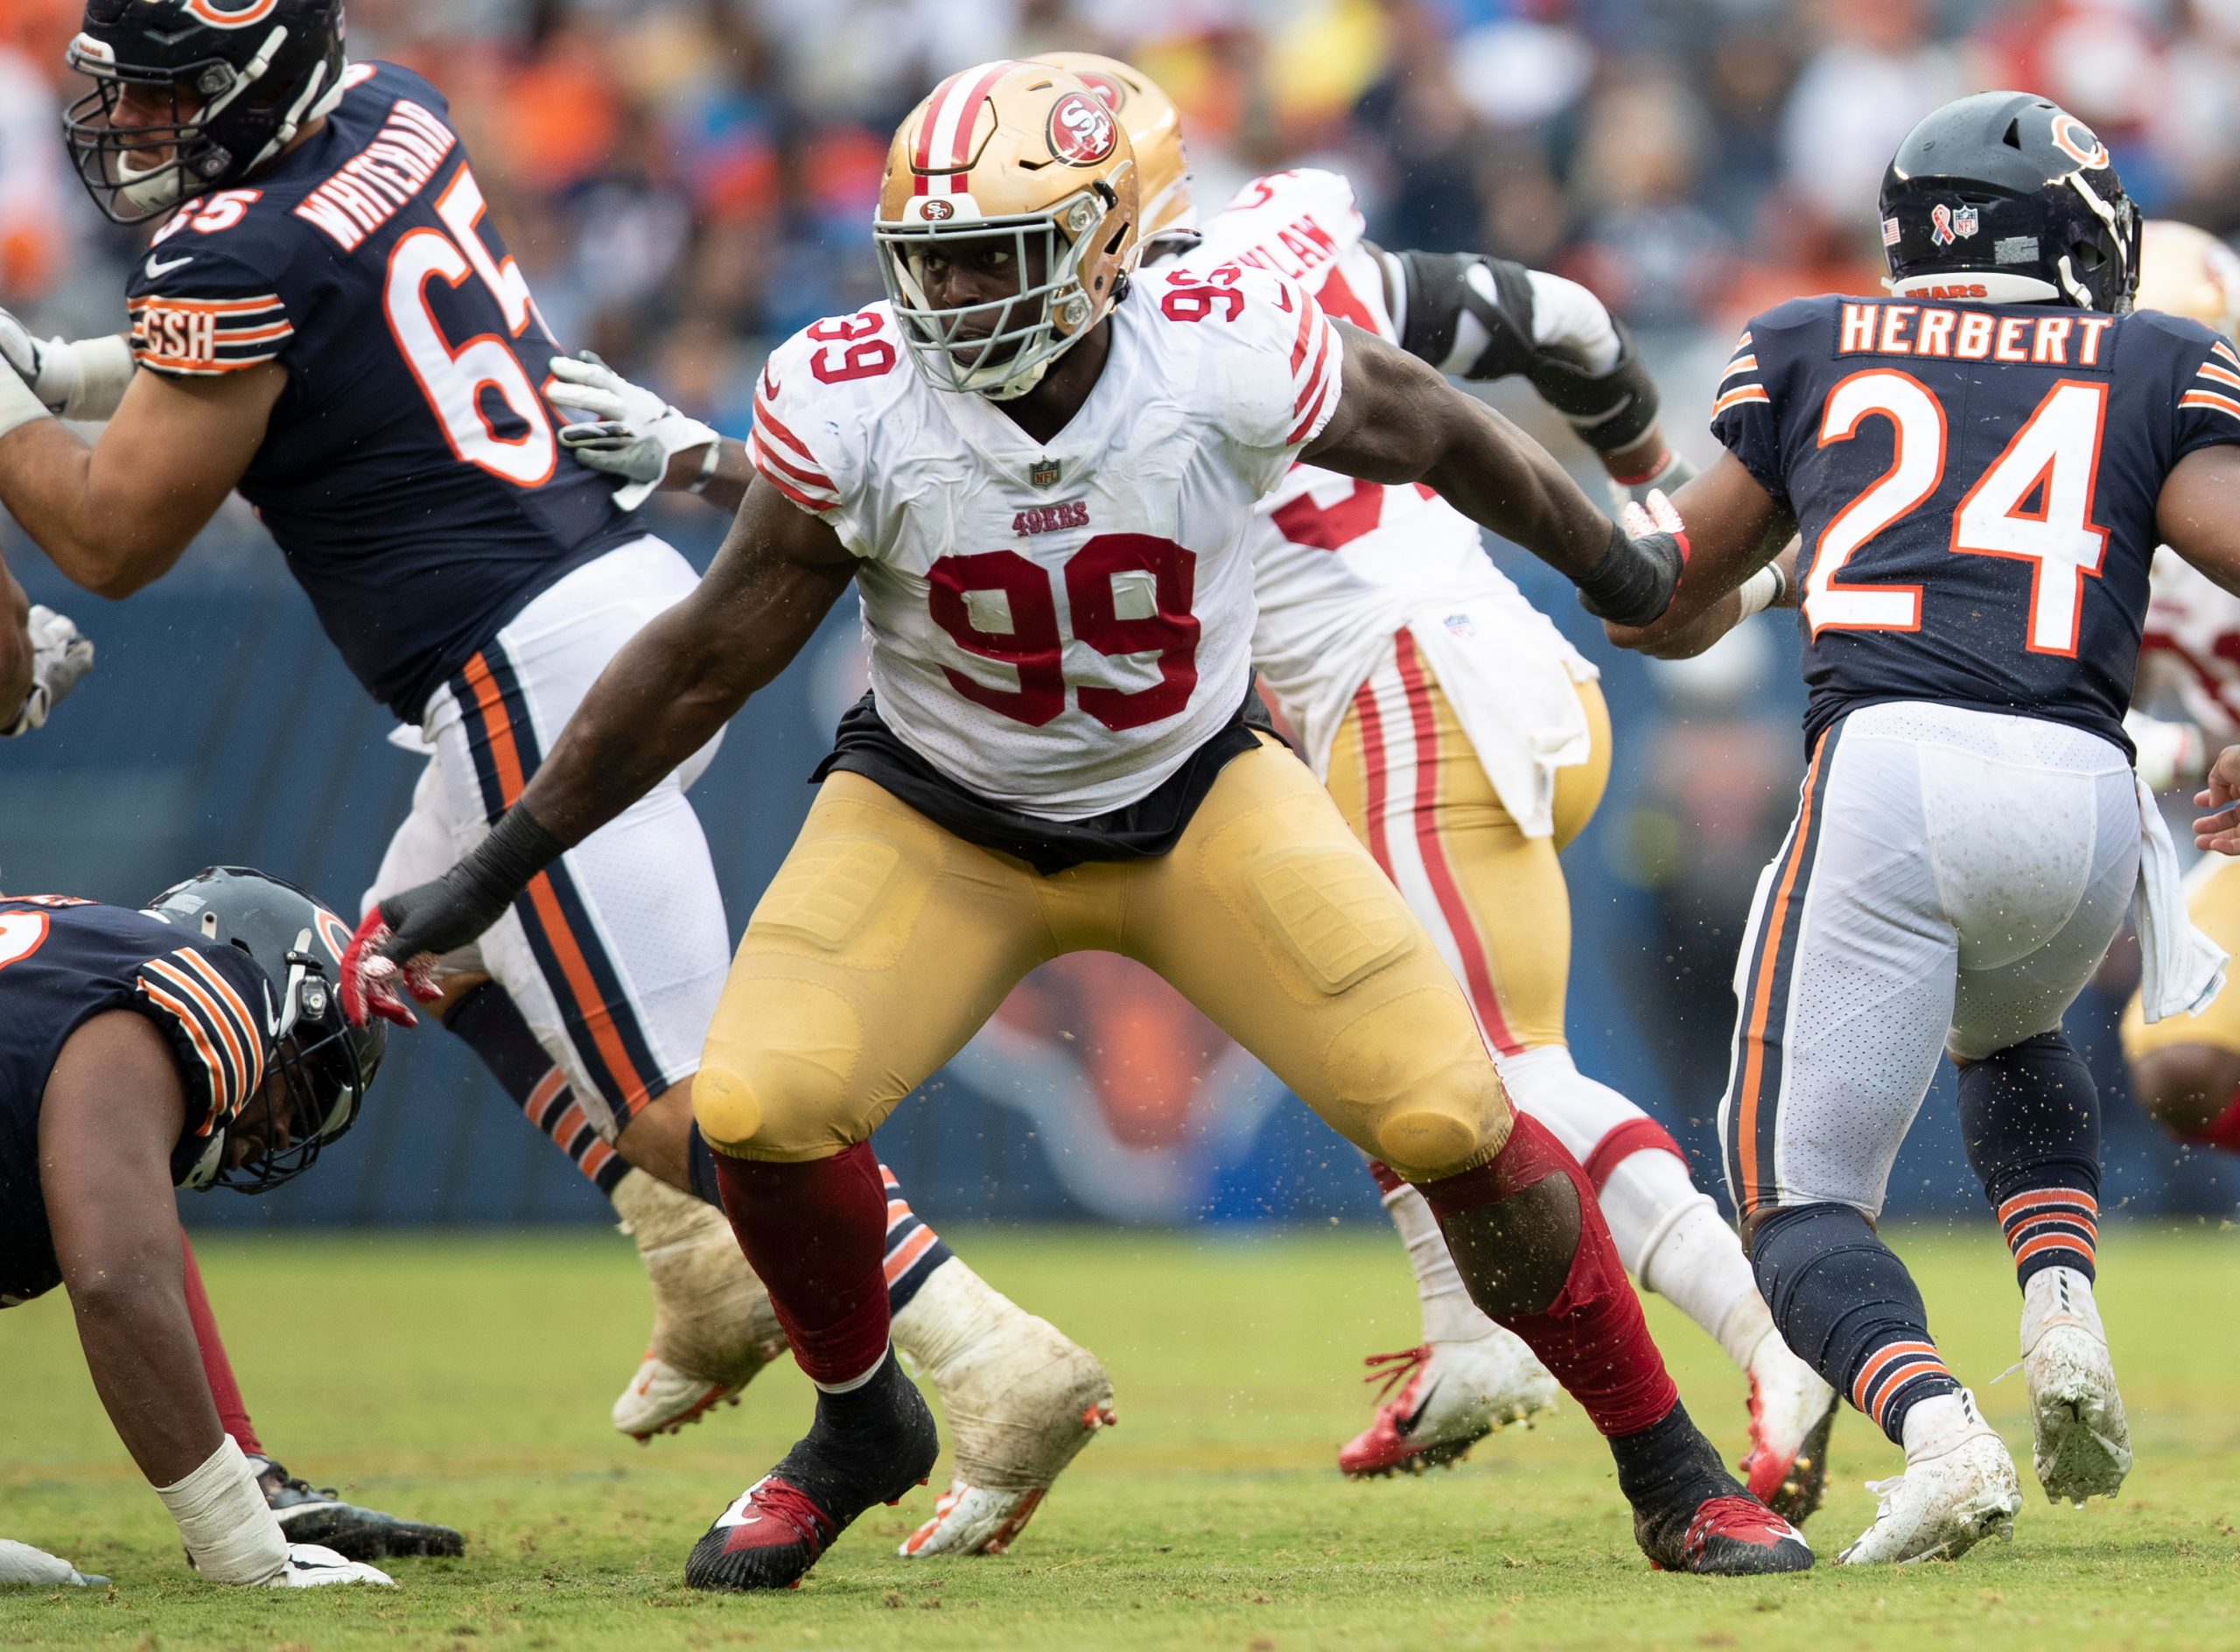 Javon Kinlaw #99 of the San Francisco 49ers rushes the quarterback during the game against the Chic...